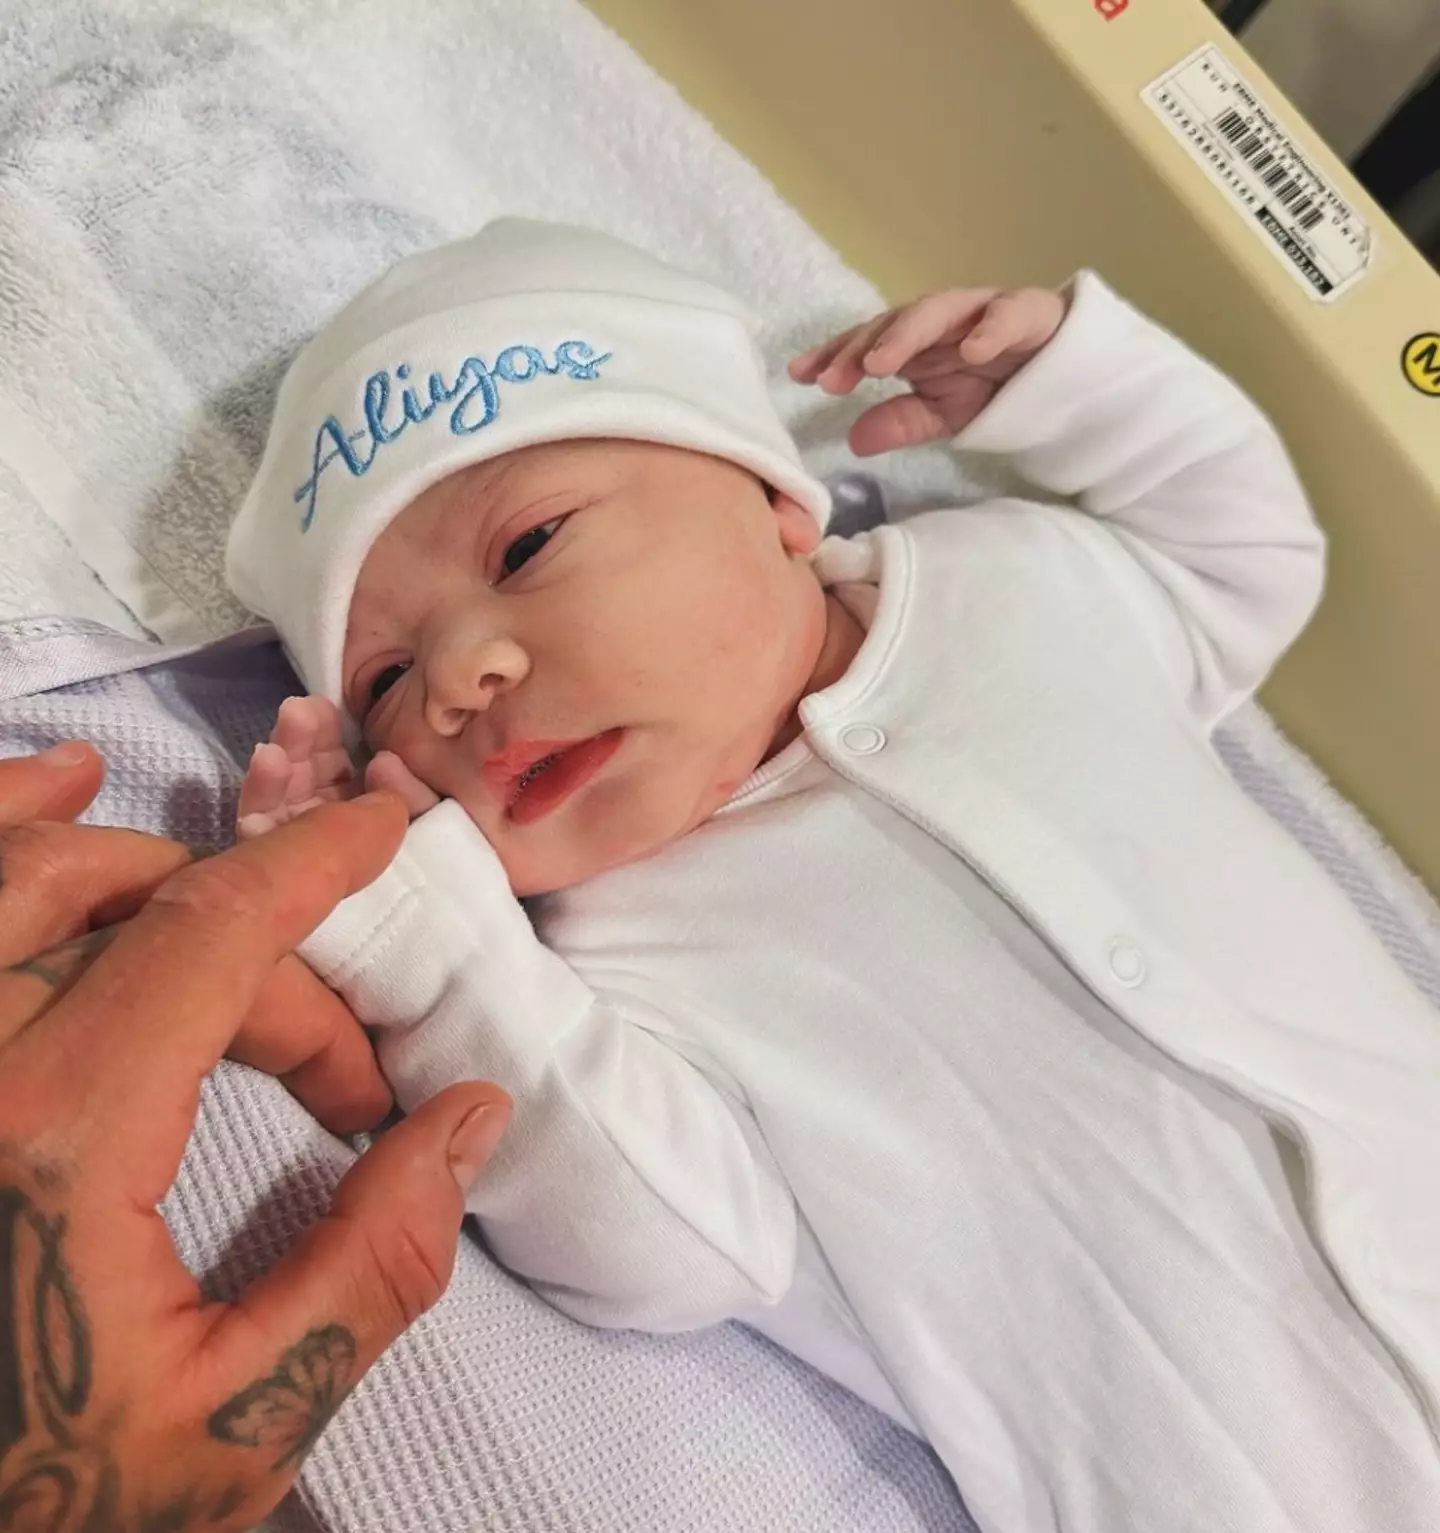 Ashley Cain welcomed his baby boy yesterday.